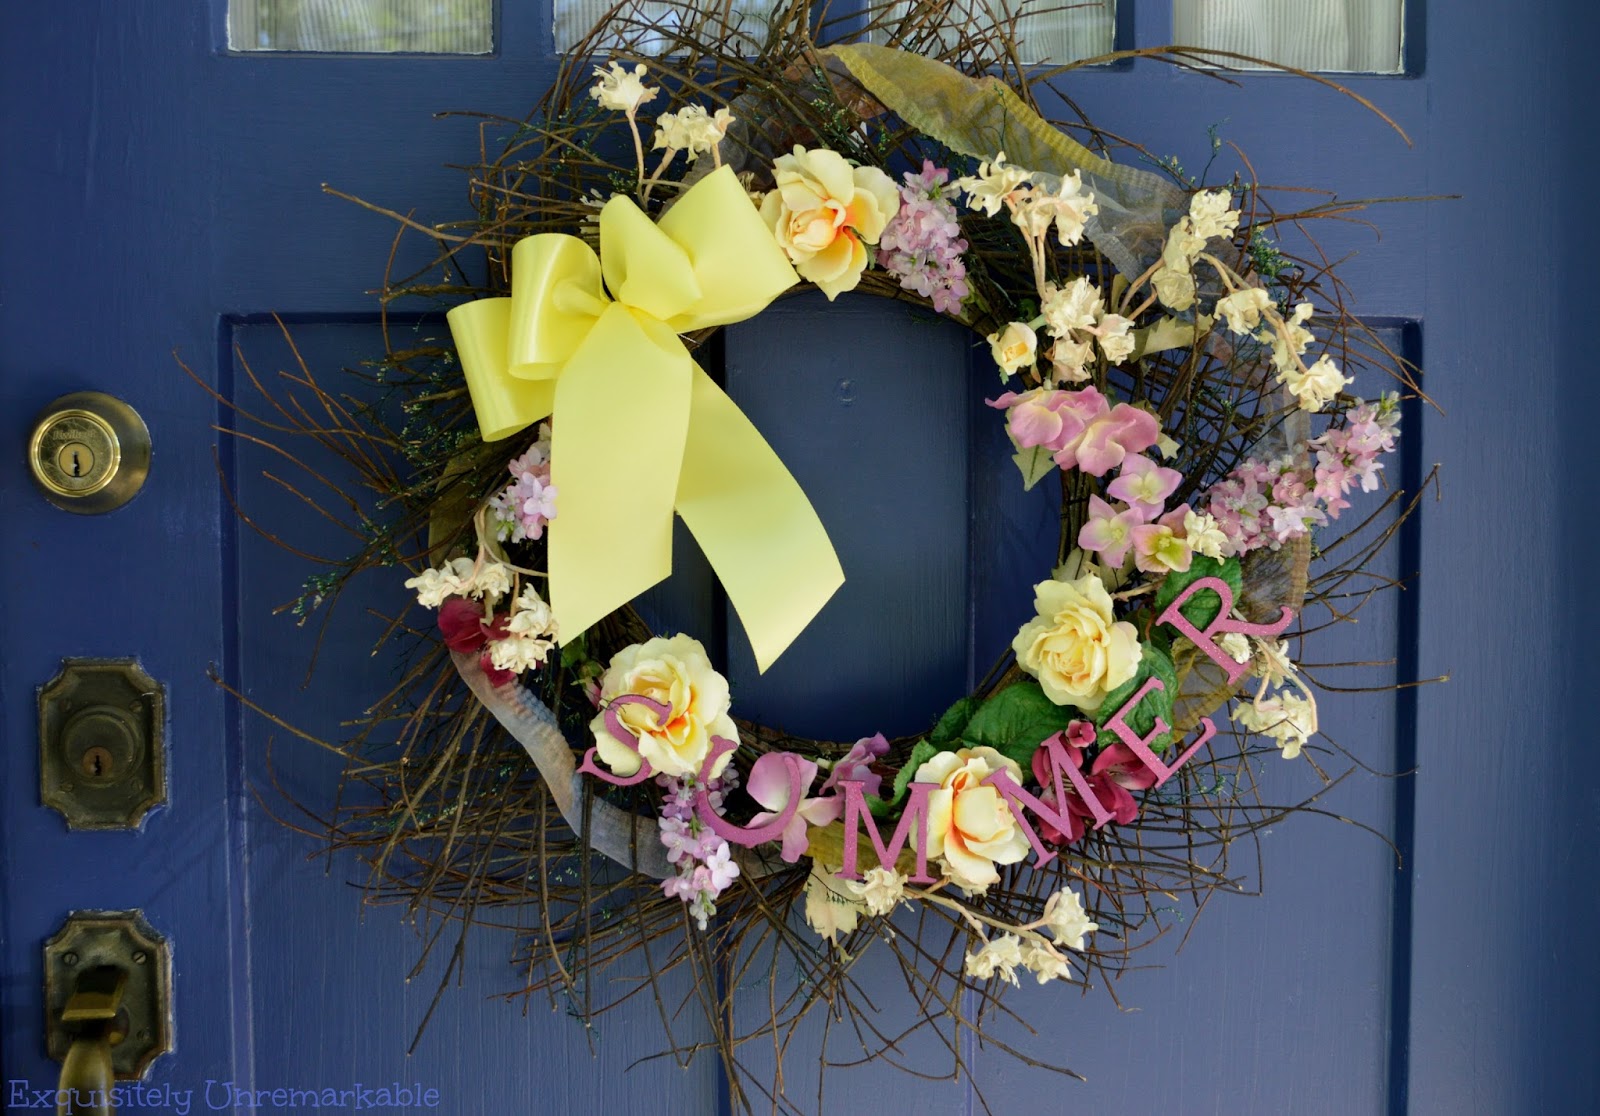 Bright floral summer wreath with a yellow bow on a blue door